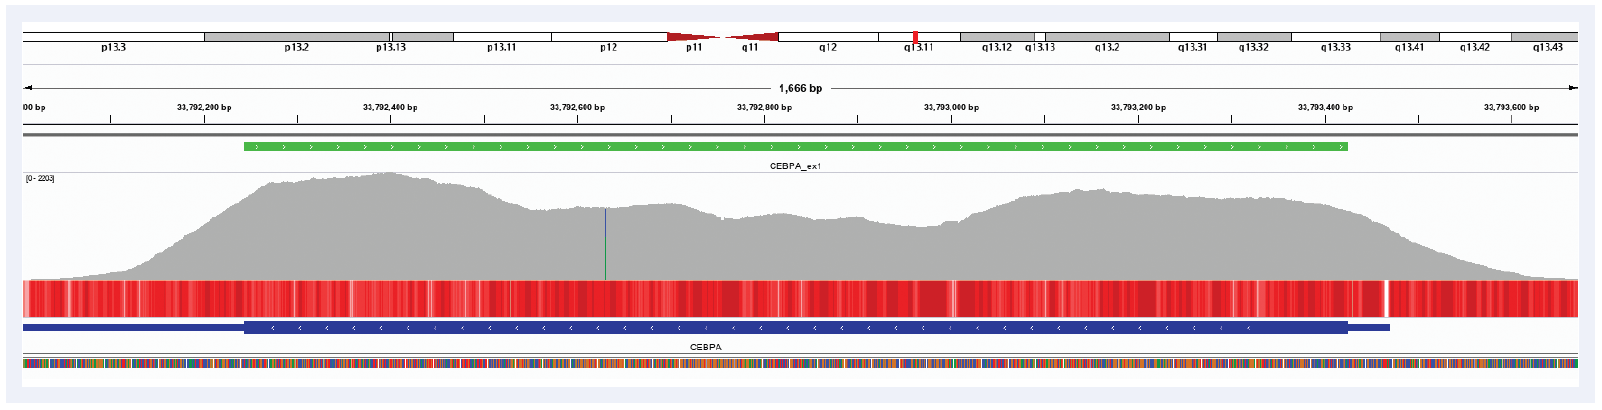 Figure 1: Illustration of the excellent coverage uniformity of the CEBPA gene. Depth of coverage per base (grey). Targeted region (green). Gene coding region as defined by RefSeq (blue). GC percentage (red).